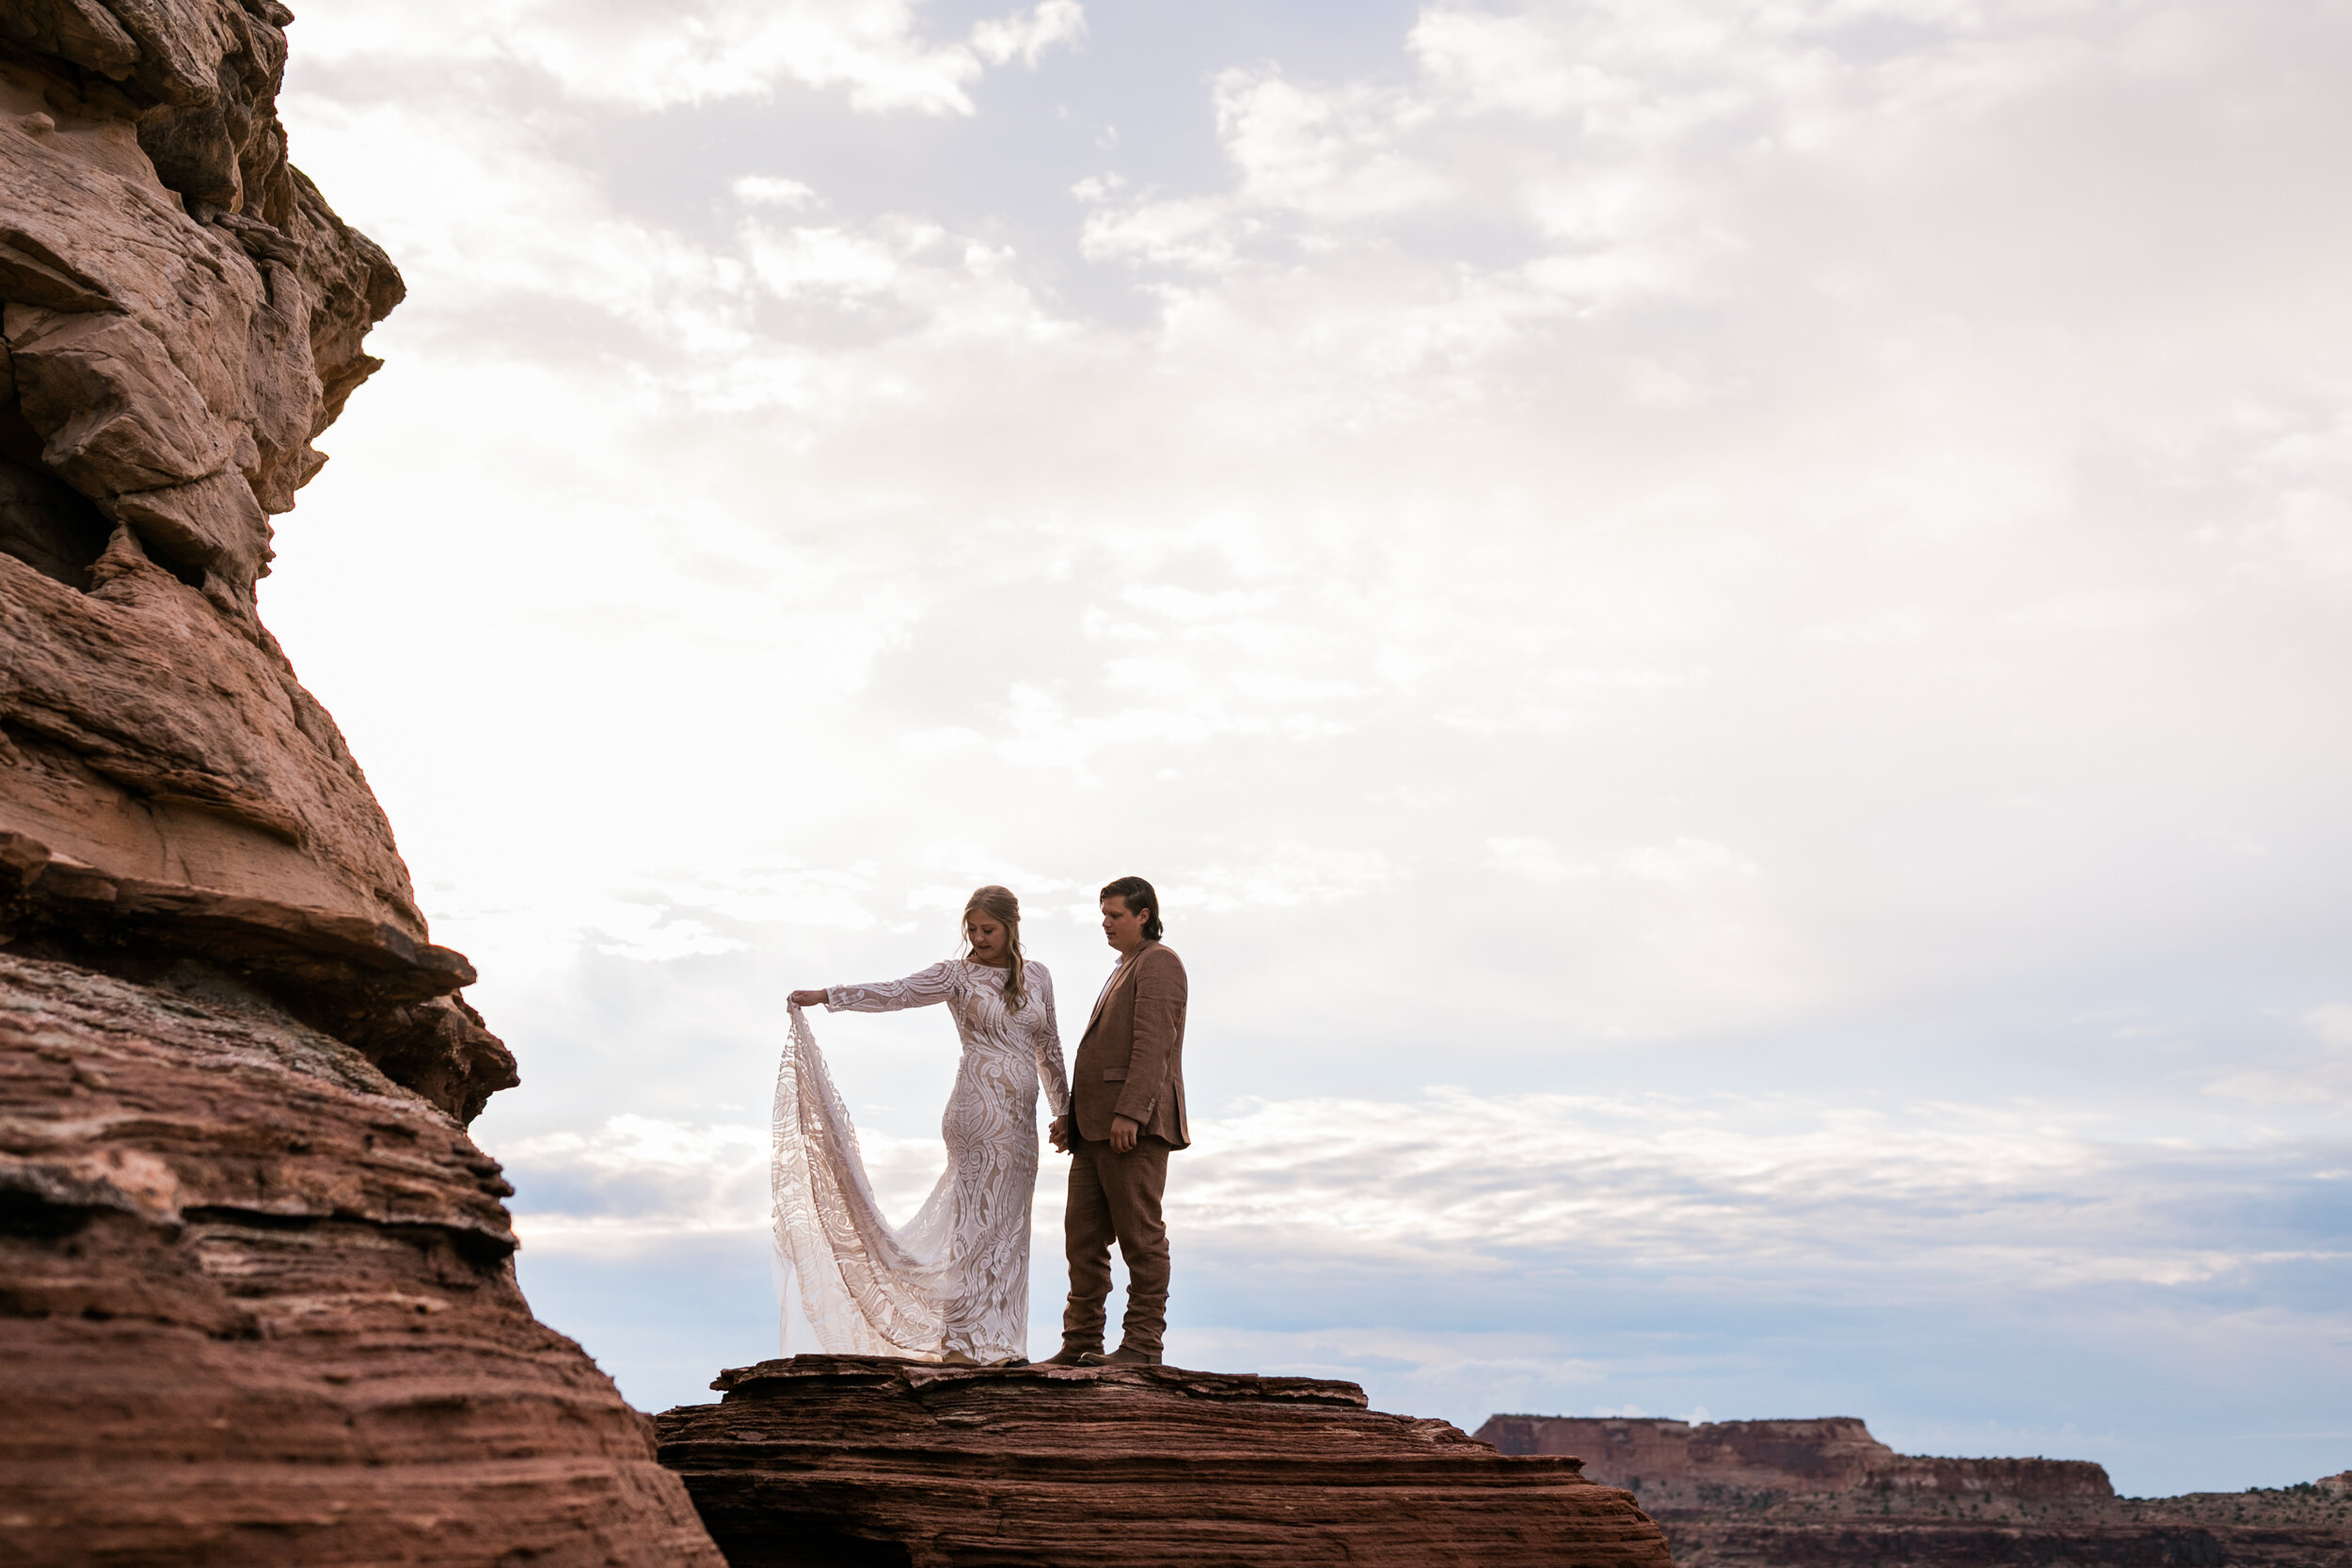 Last-minute elopement wedding in Moab, Utah | Elopement with kids | Wedding Photos with a baby | The Hearnes